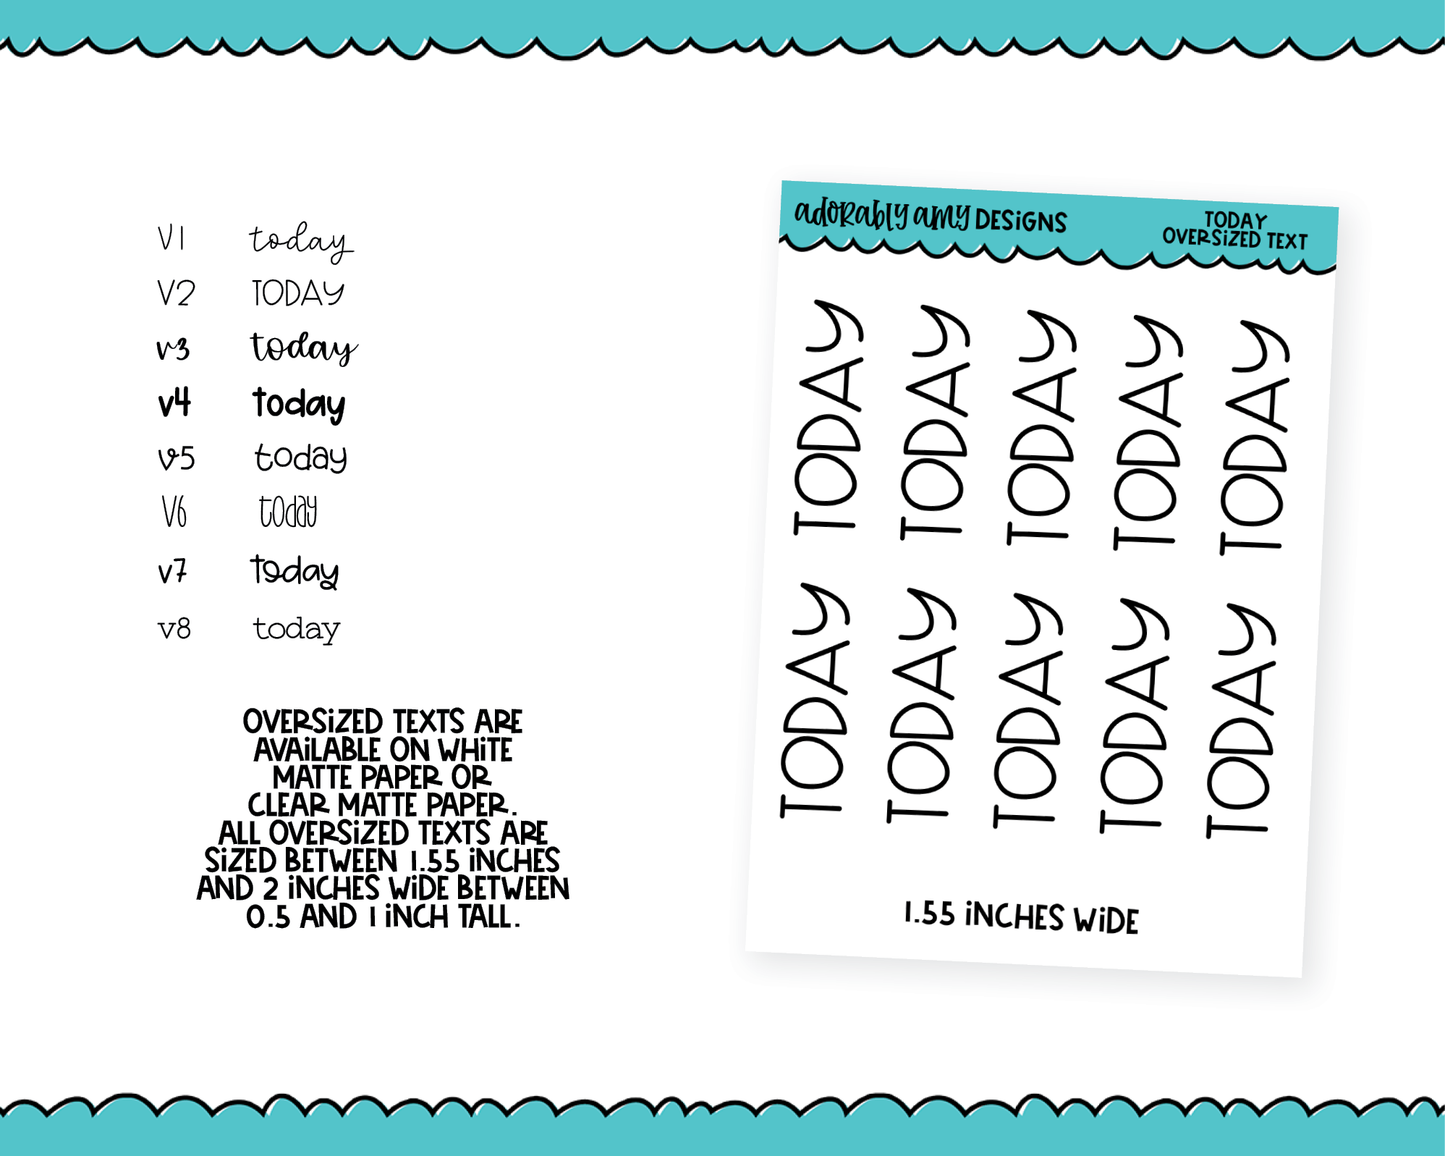 Oversized Text - Today Large Text Planner Stickers